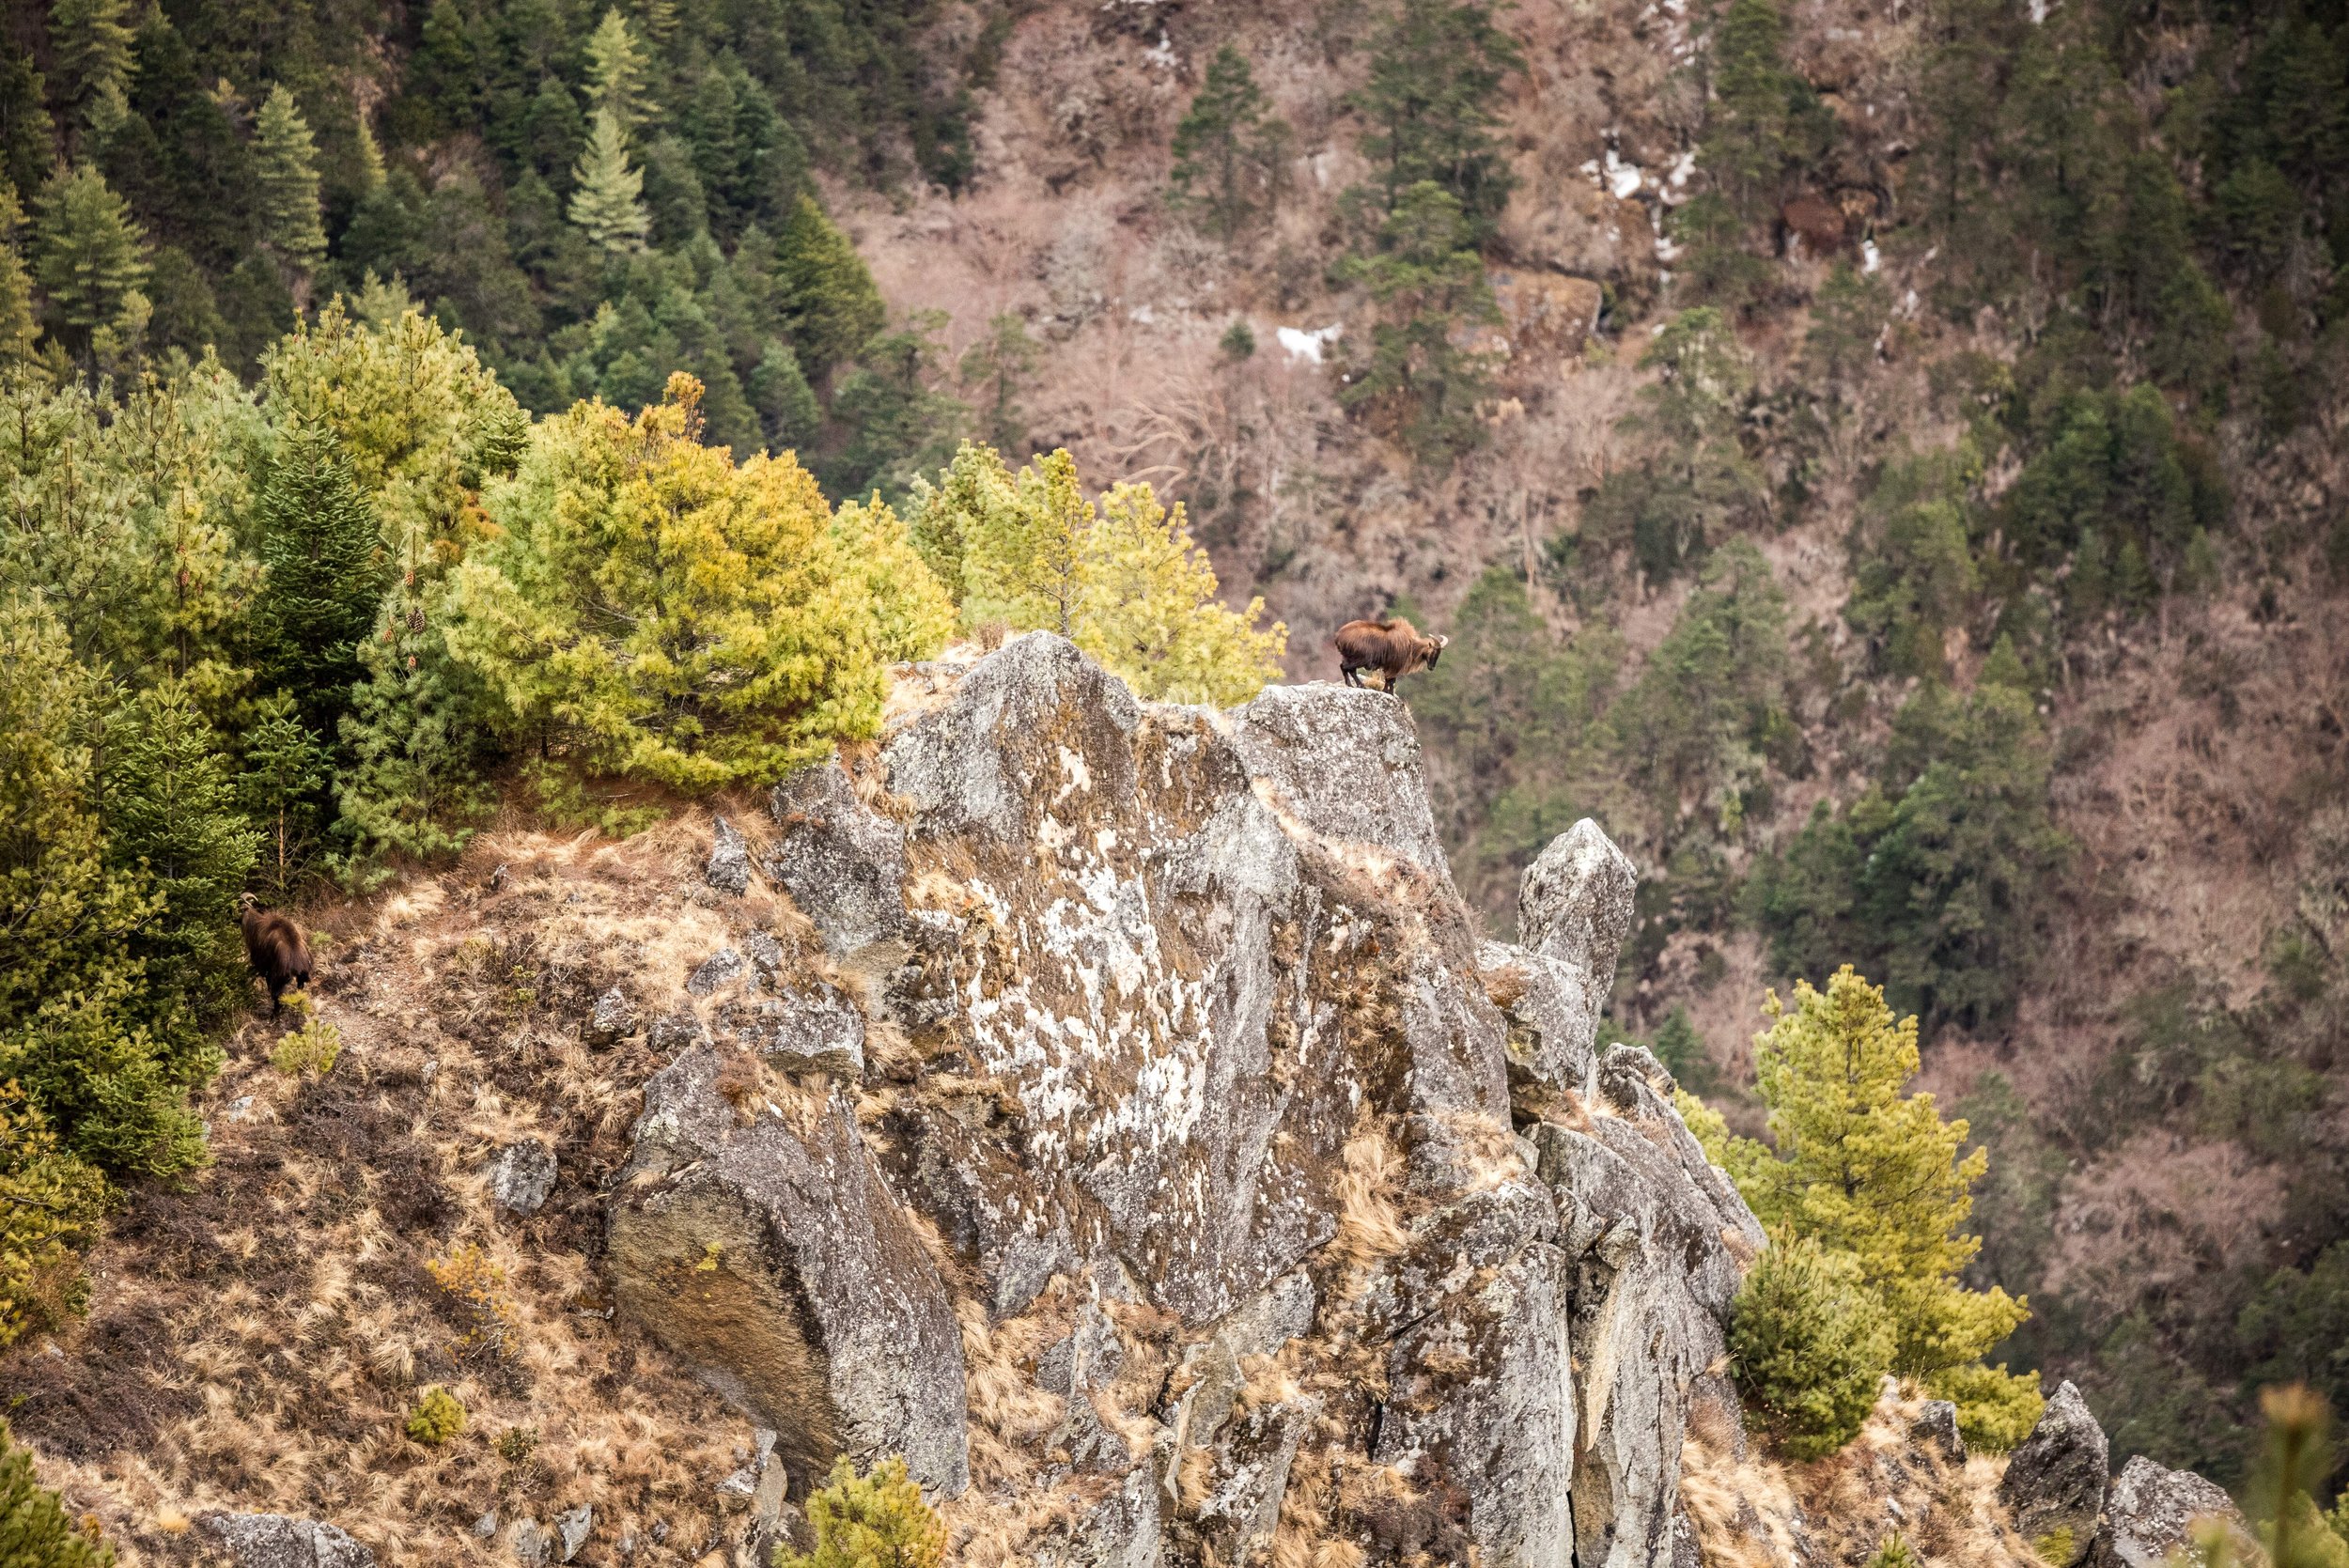 Keep your eye out for Mountain Goats in the steep rocky gorges